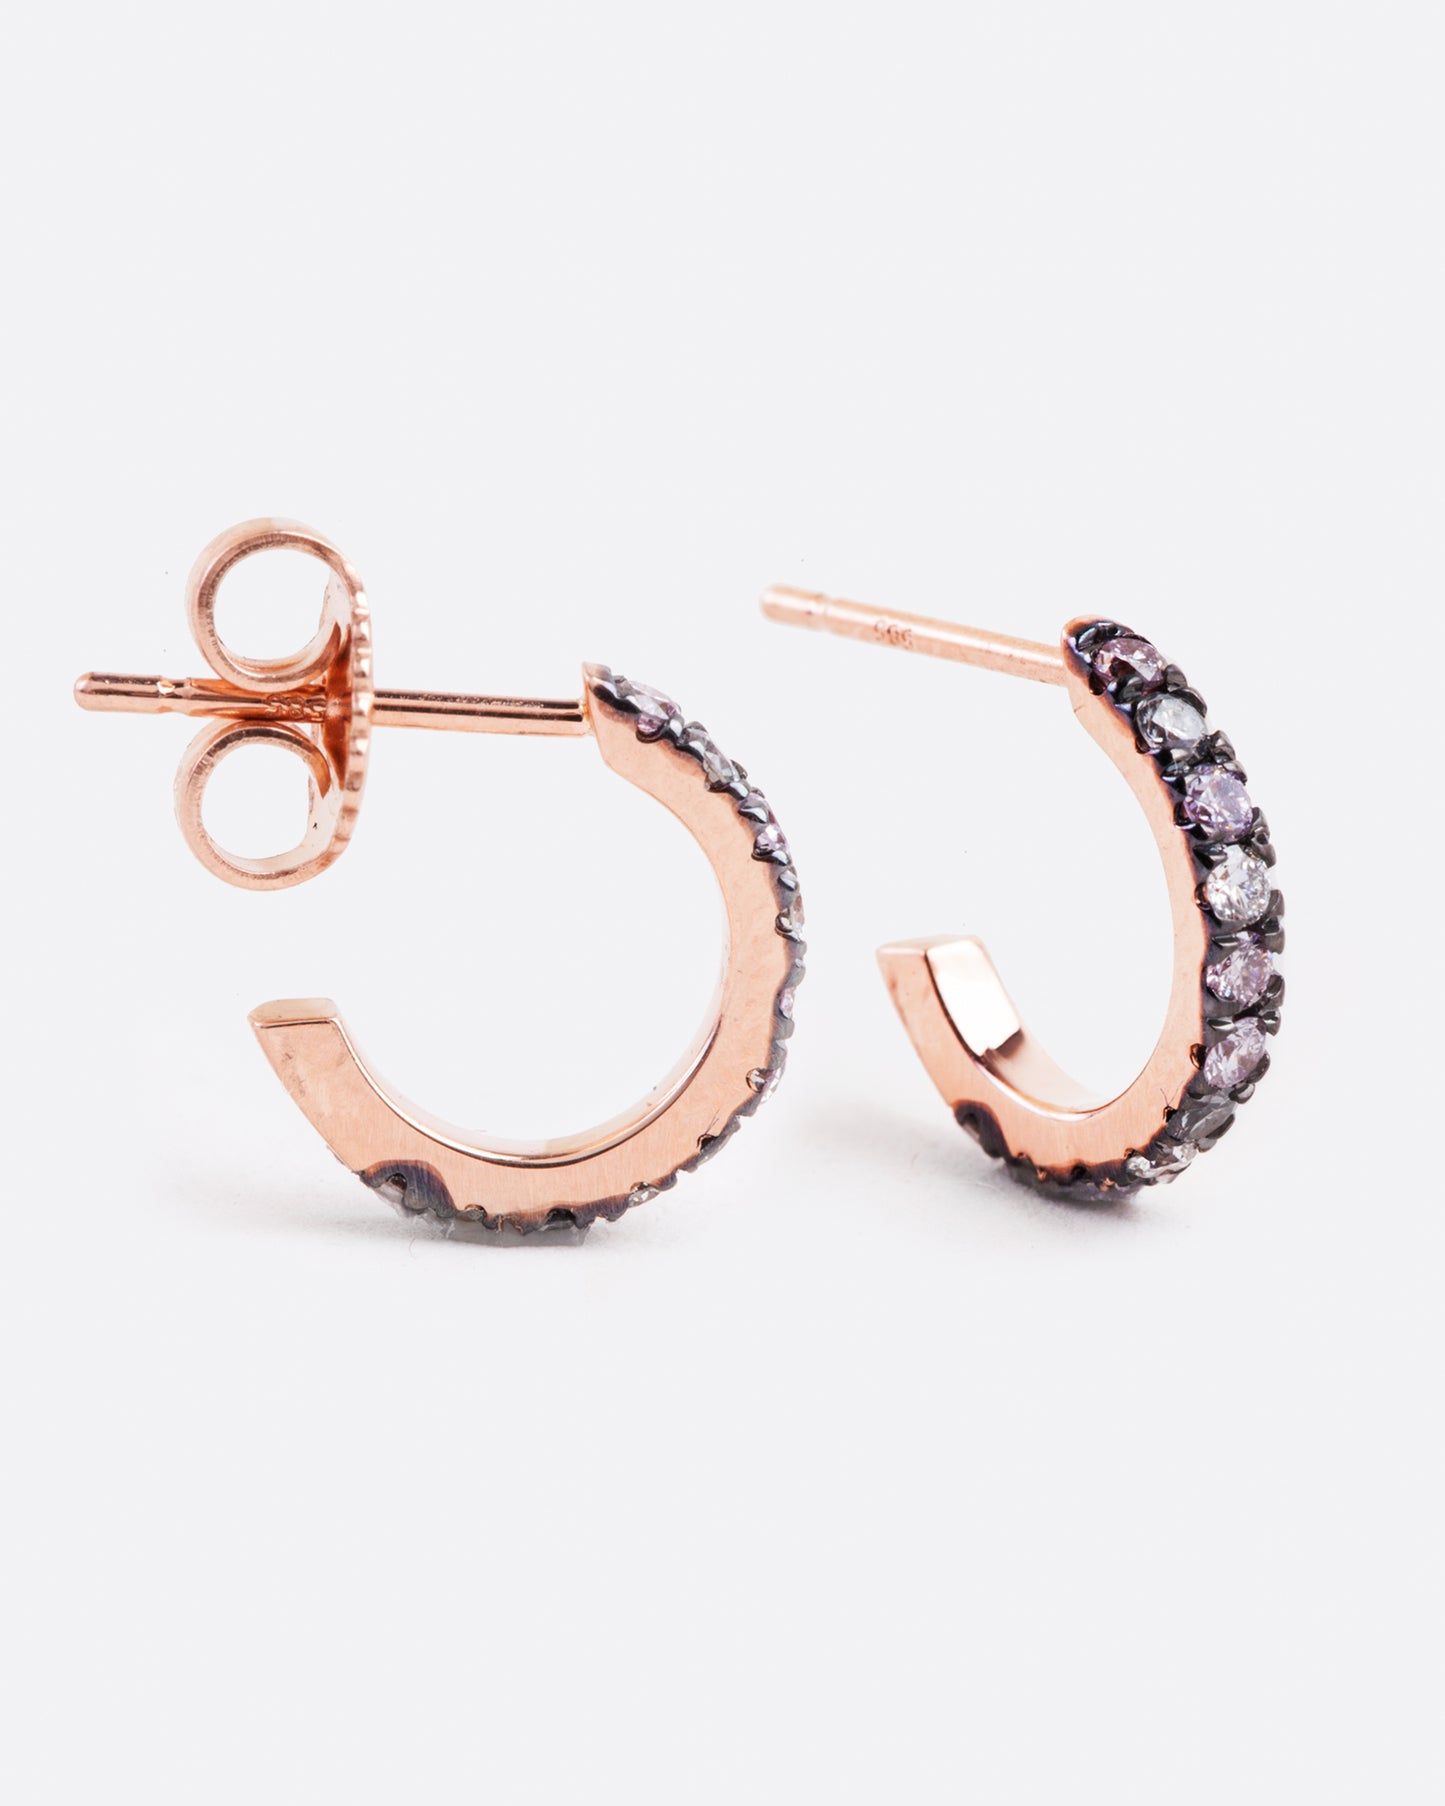 huggie hoop earrings with a stud post backing, they are rose gold with blackened settings around the grey, pink and white diamonds that are set along the huggie